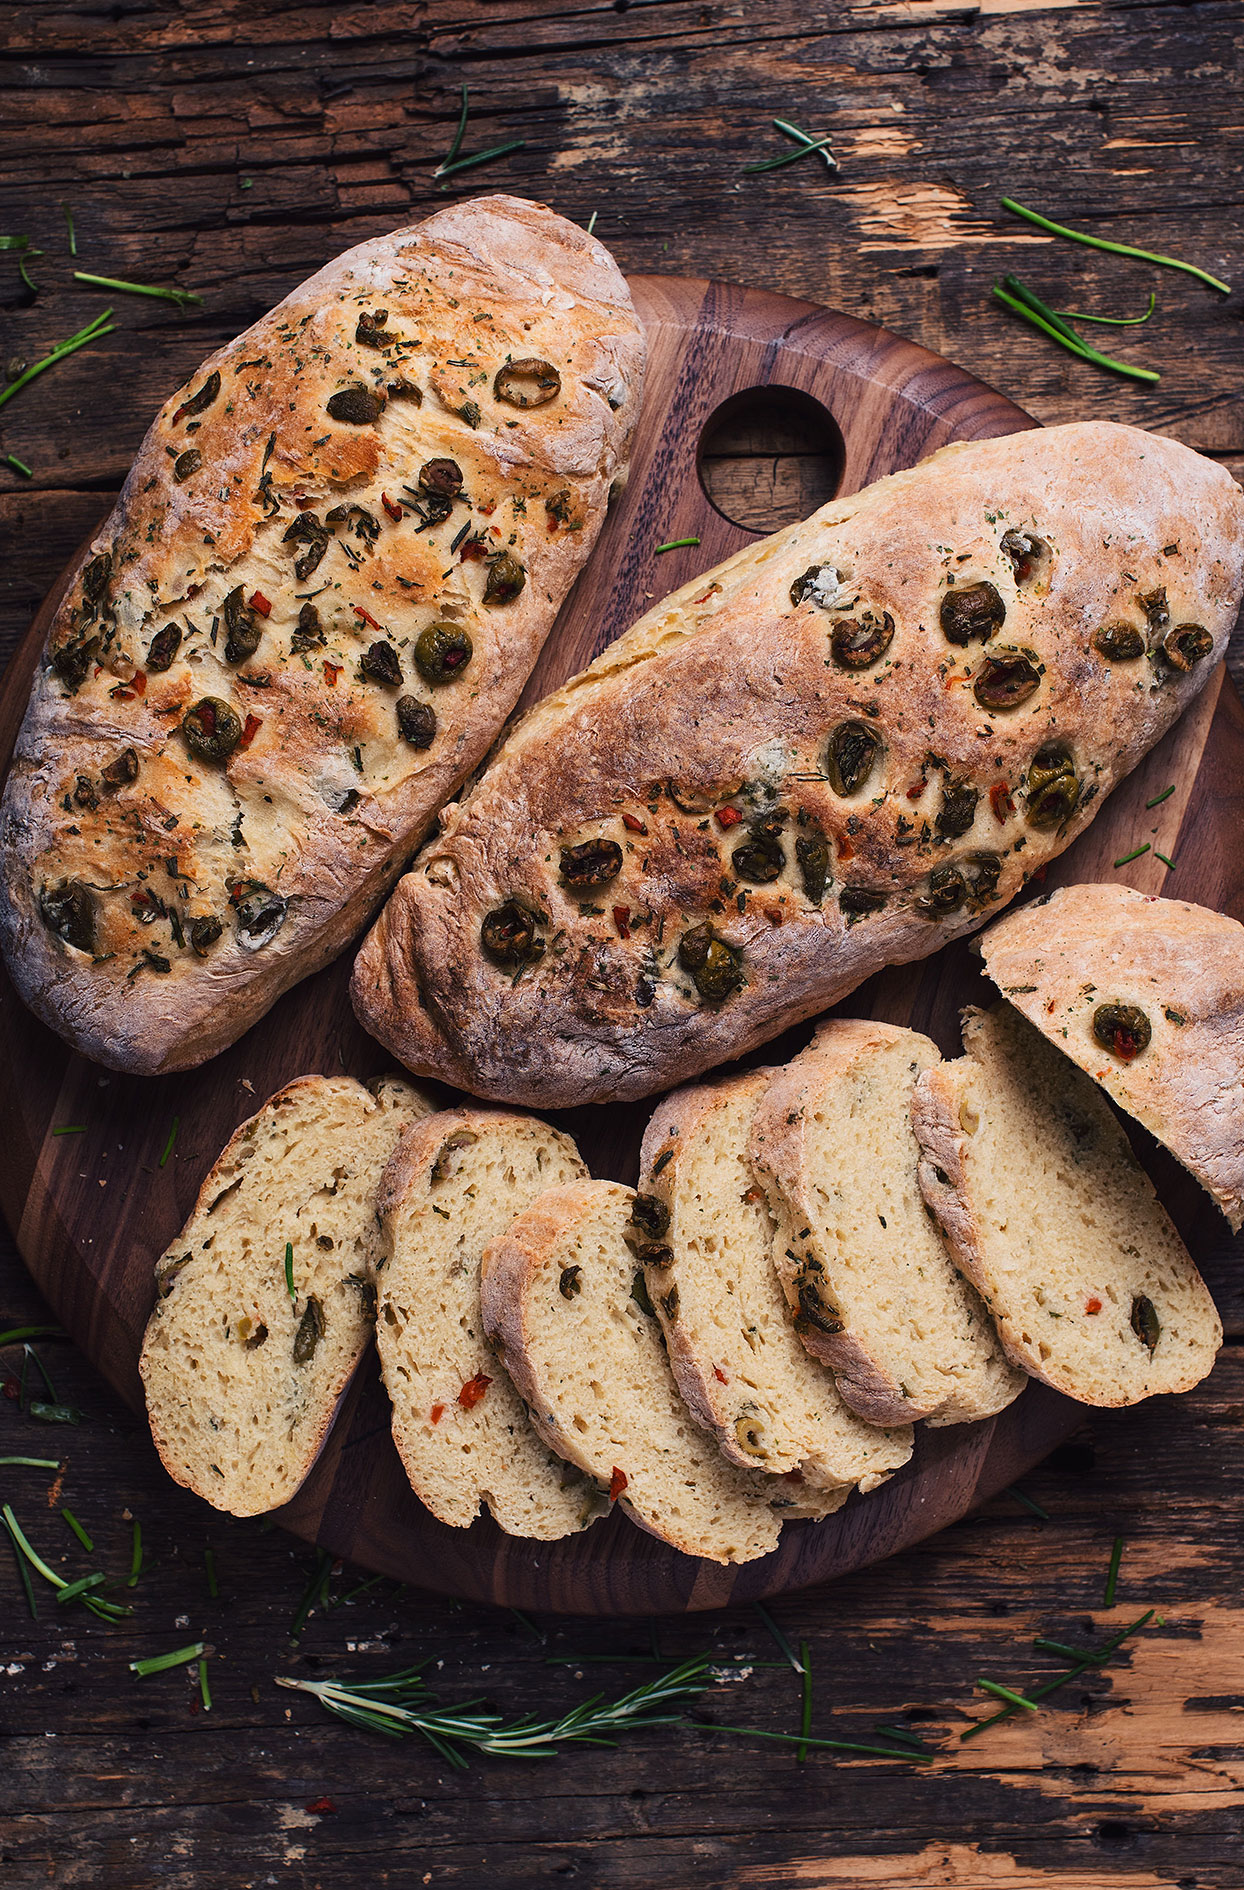 Bread baguettes with olives, fresh herbs and beer